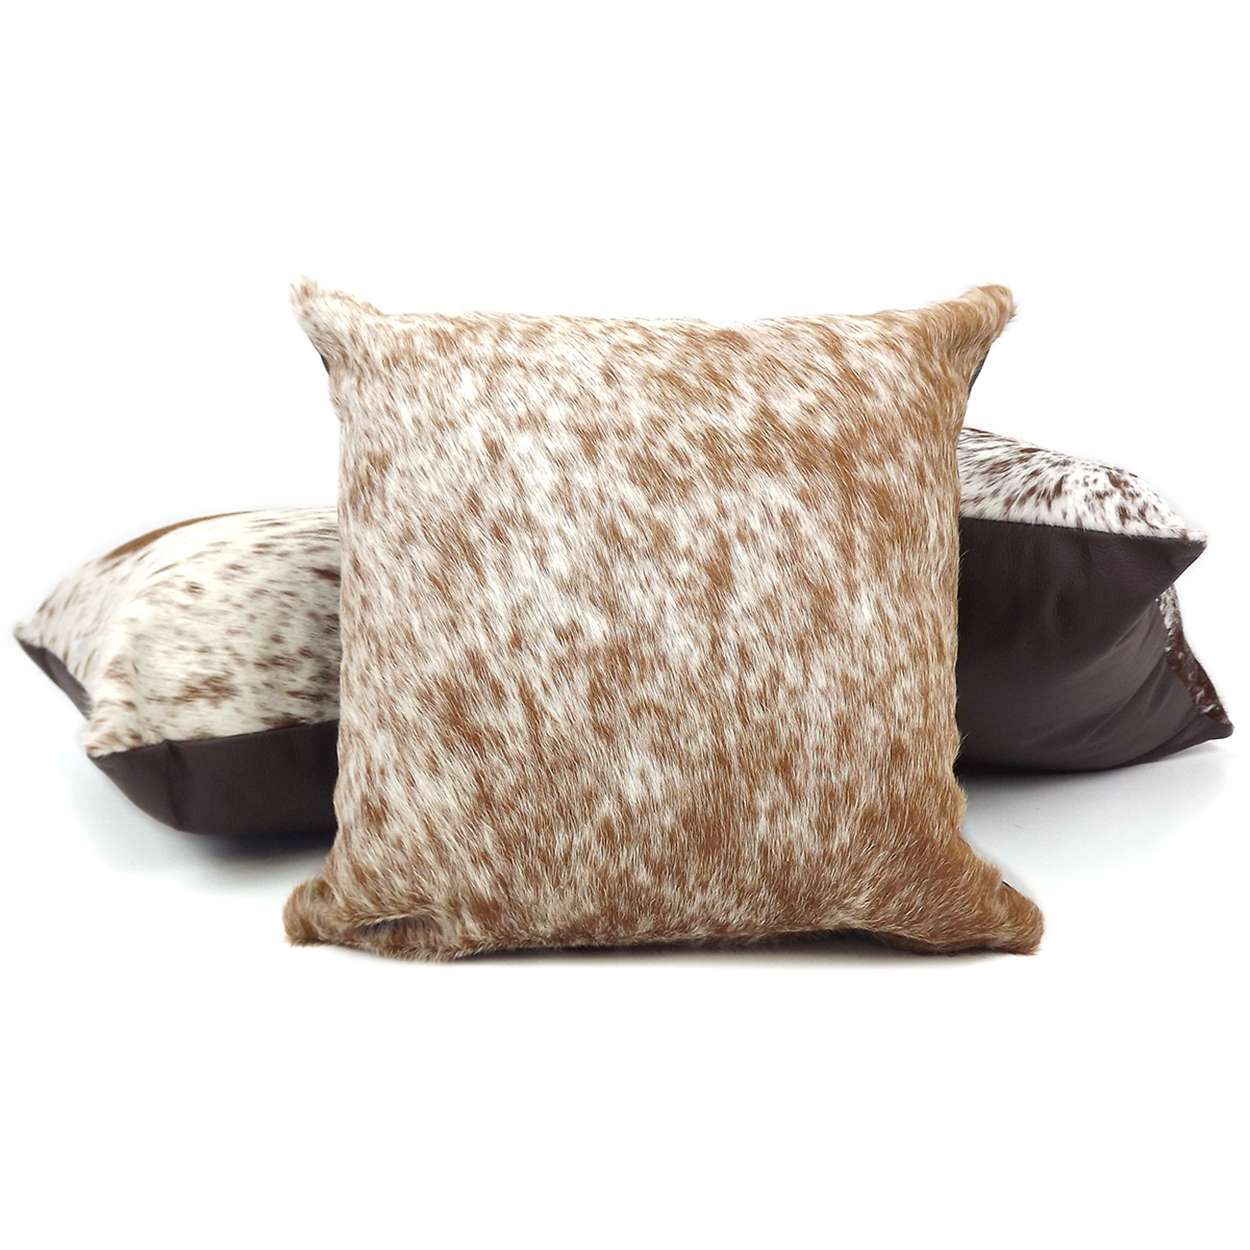 15in Overstuffed Cowhide Pillow - Salt and Pepper Brown - Leather Back